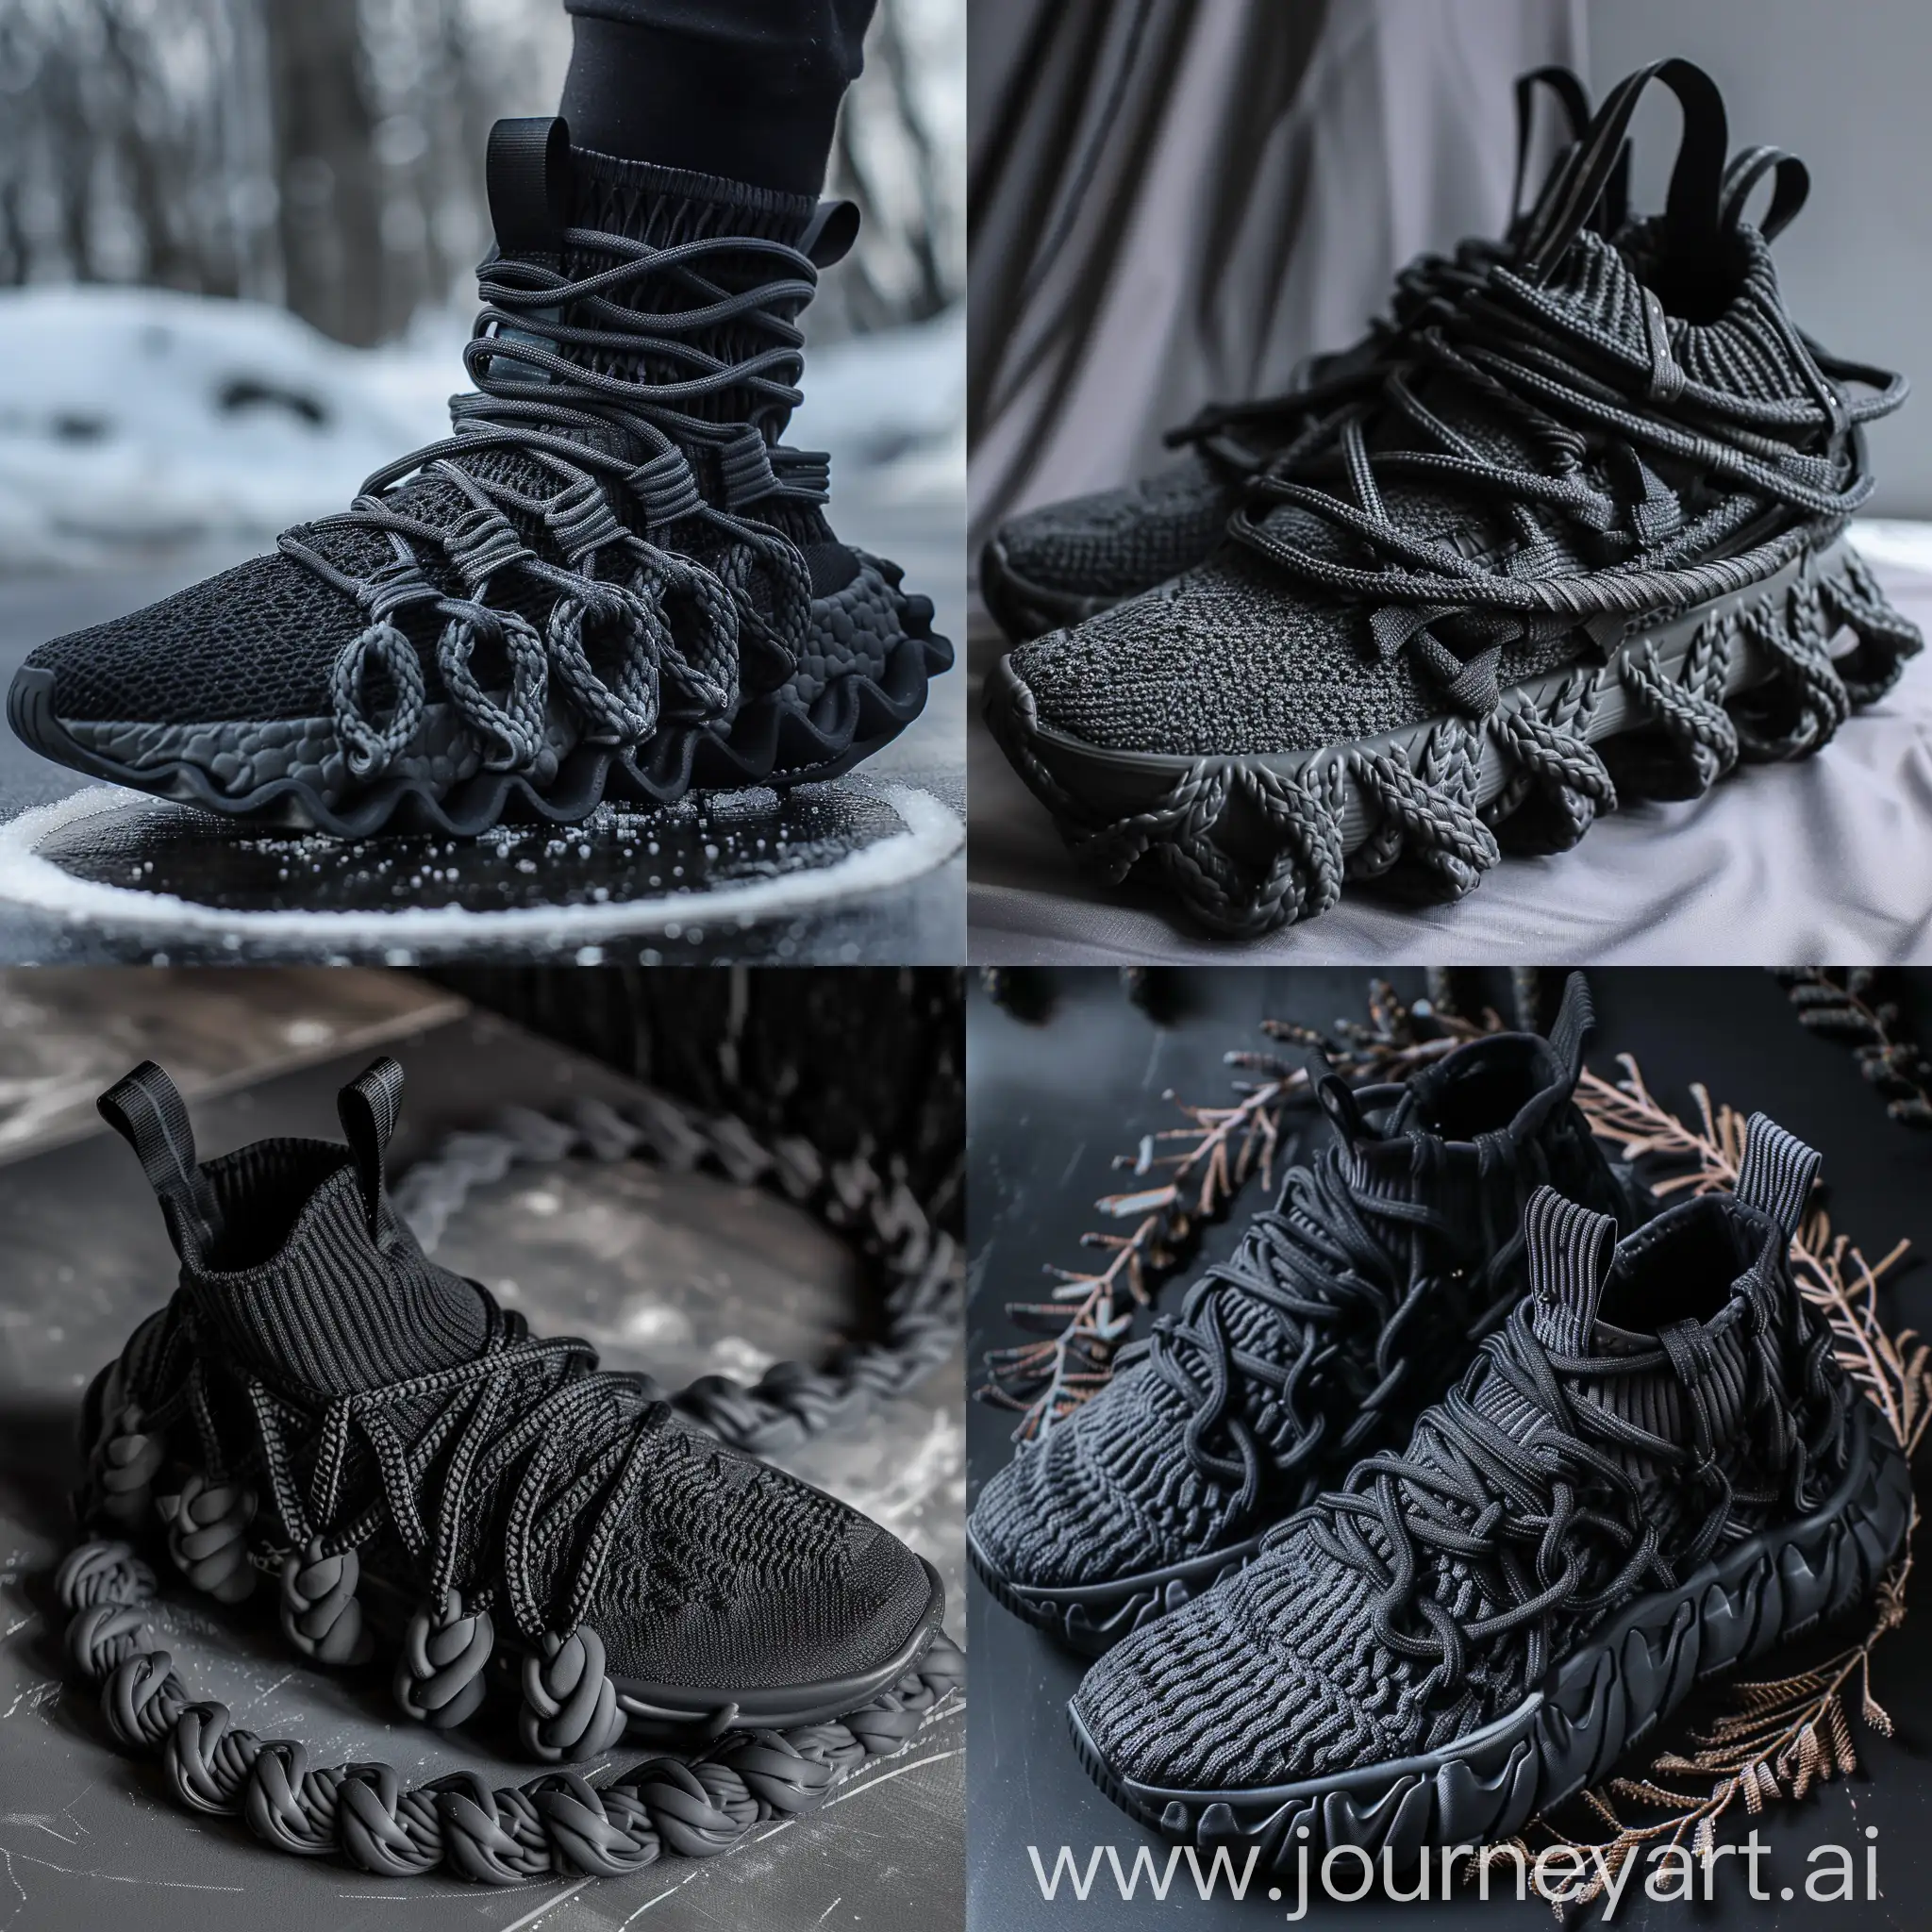 Trendy-Black-Knitted-Cable-Sneakers-with-Futuristic-Street-Wear-Vibe